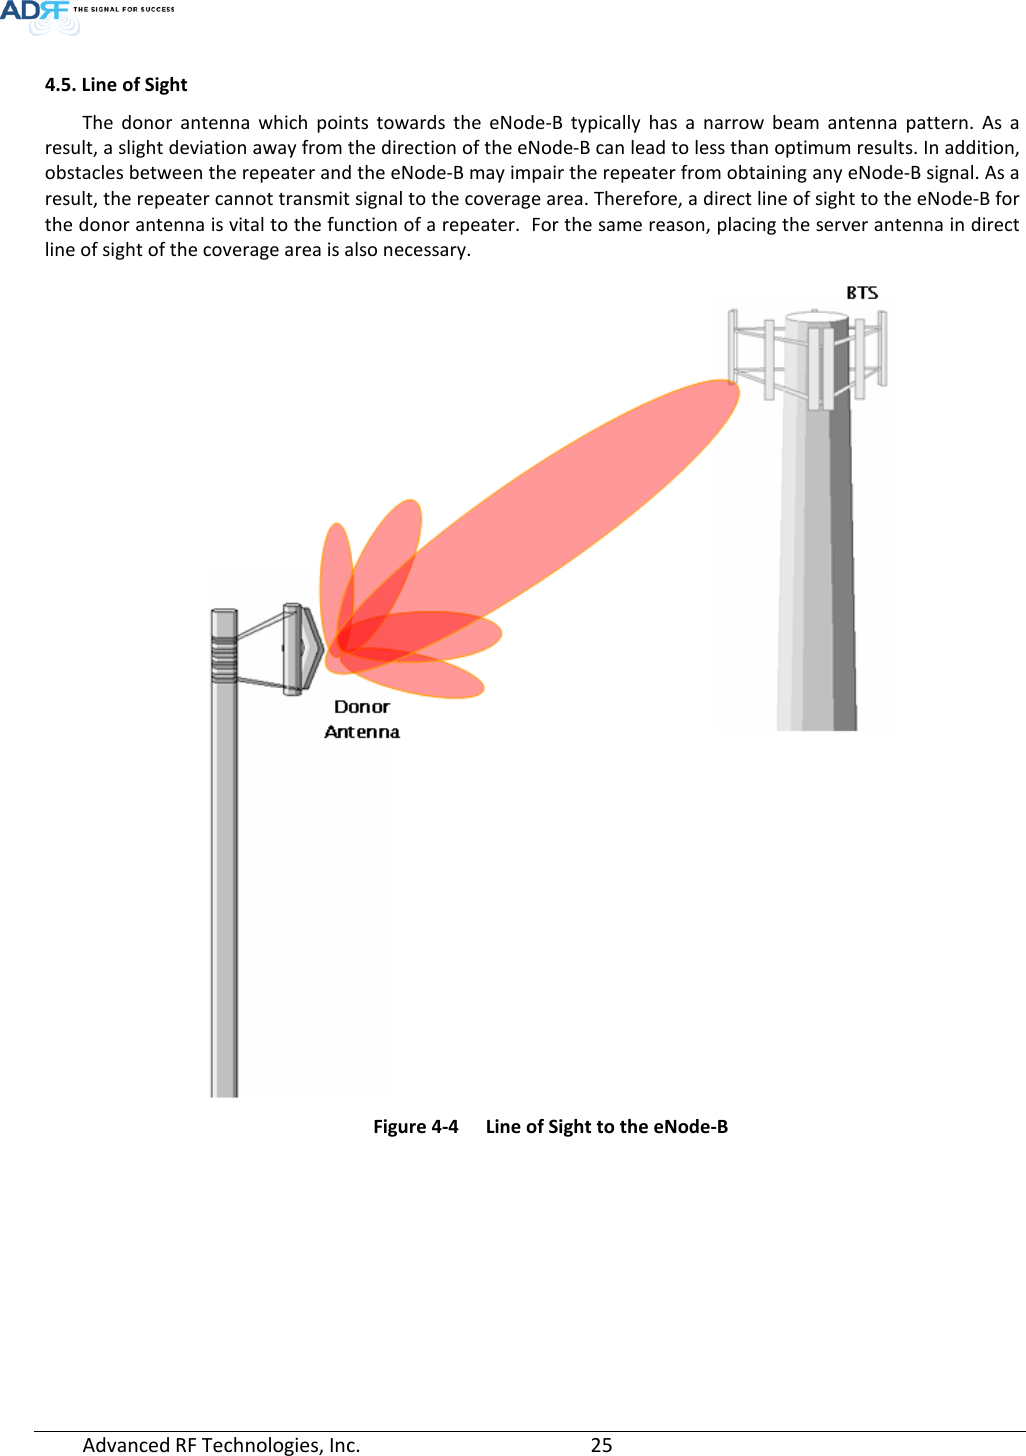  4.5. Line of Sight The donor antenna which points towards the eNode-B  typically has a narrow beam antenna pattern. As a result, a slight deviation away from the direction of the eNode-B can lead to less than optimum results. In addition, obstacles between the repeater and the eNode-B may impair the repeater from obtaining any eNode-B signal. As a result, the repeater cannot transmit signal to the coverage area. Therefore, a direct line of sight to the eNode-B for the donor antenna is vital to the function of a repeater.  For the same reason, placing the server antenna in direct line of sight of the coverage area is also necessary.   Figure 4-4  Line of Sight to the eNode-B  Advanced RF Technologies, Inc.       25    